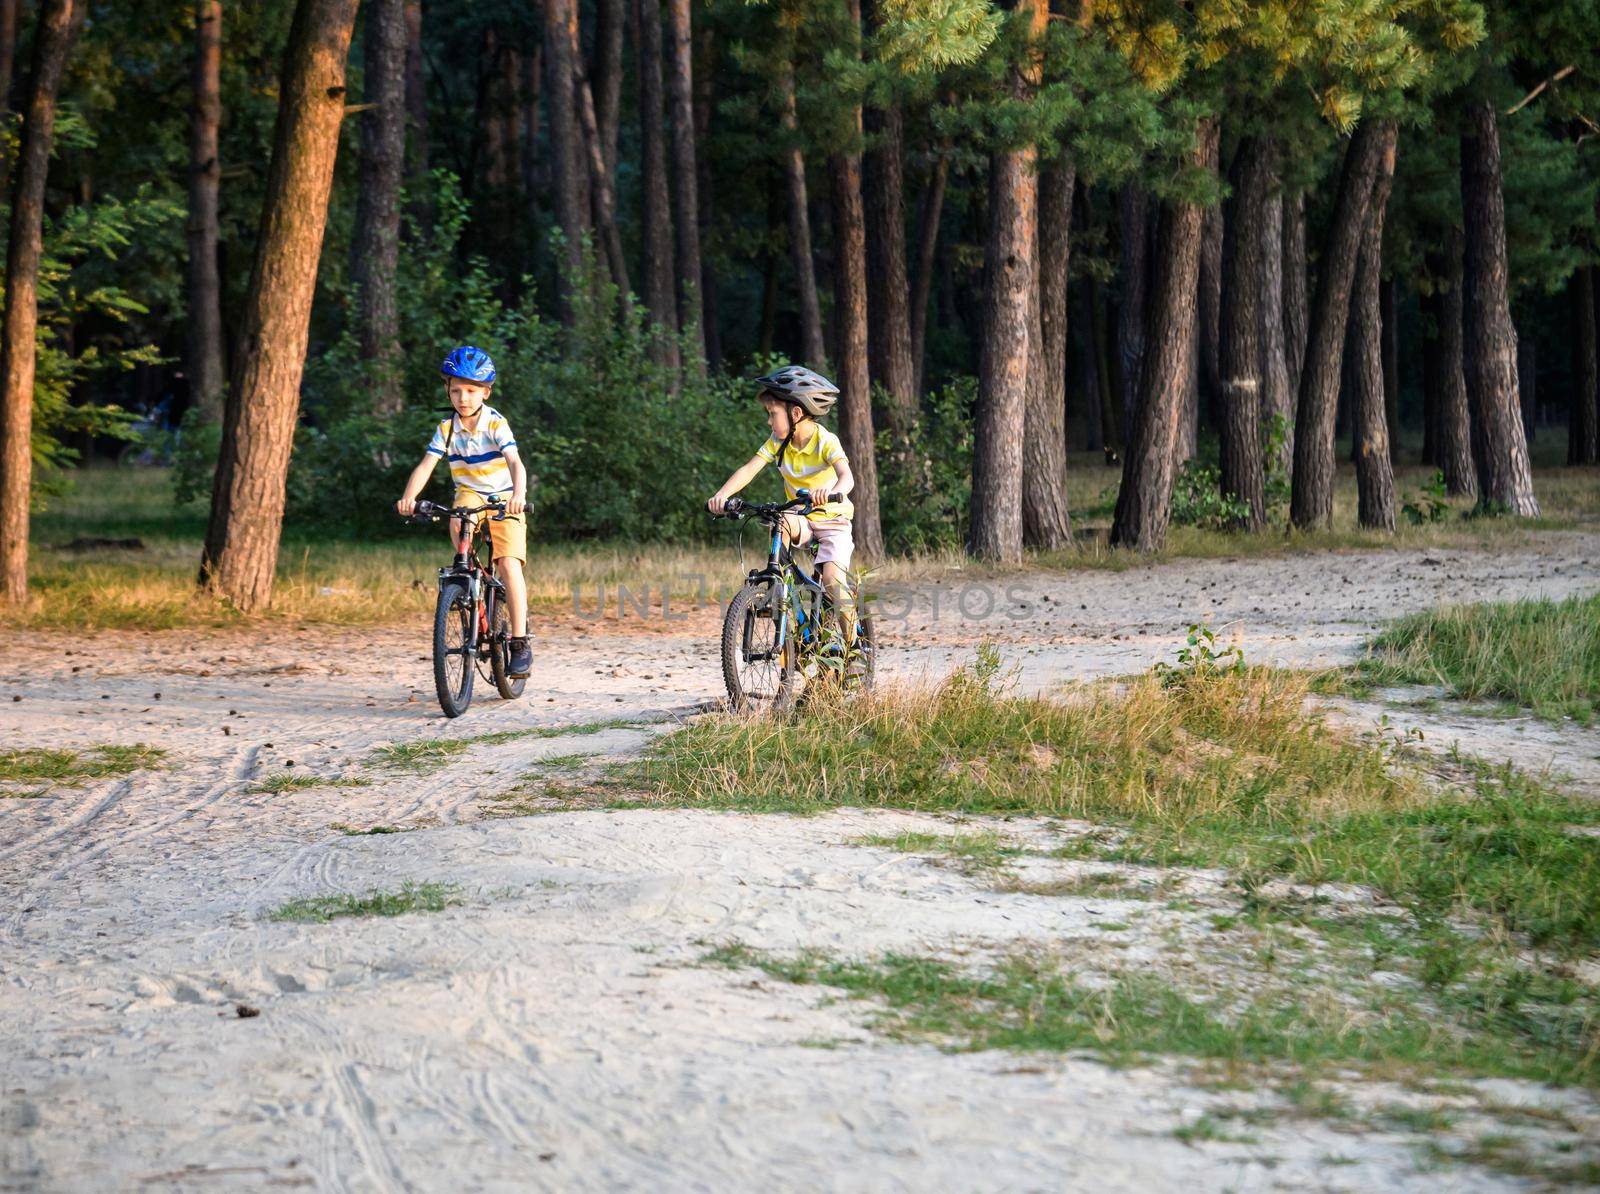 Two active little sibling boys having fun on bikes in forest on warm day. by Kobysh